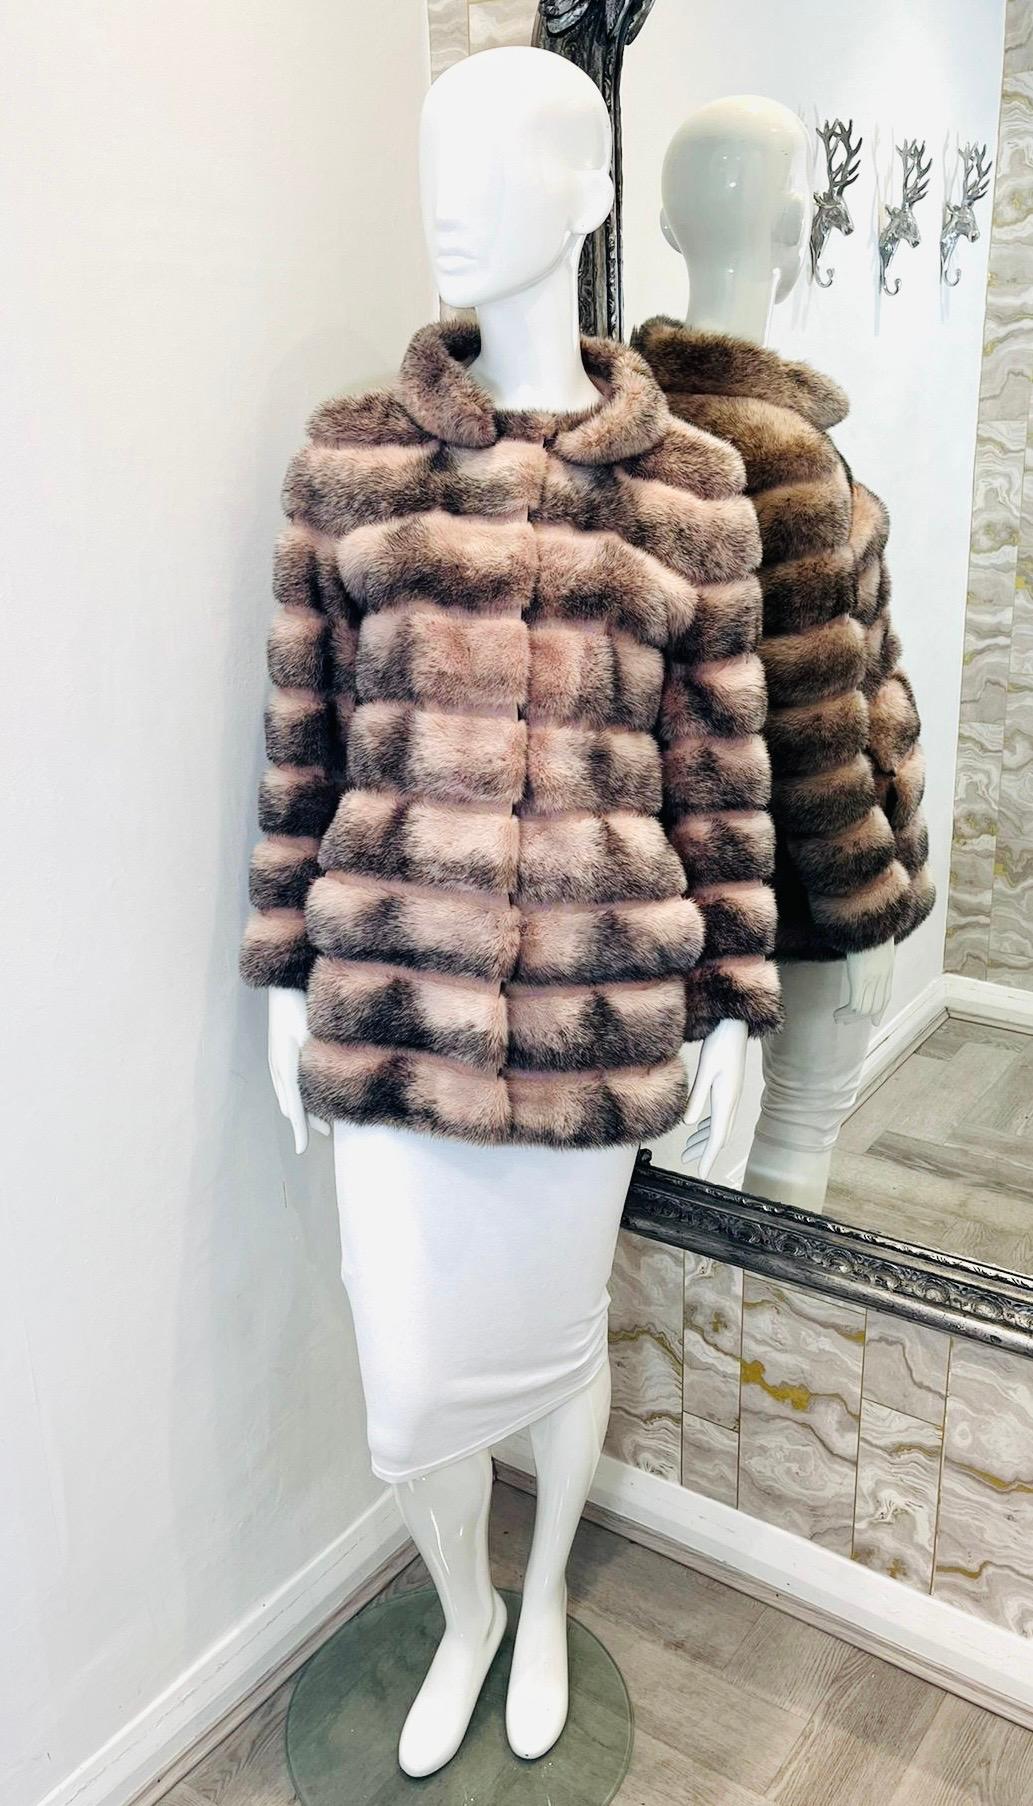 Fendi Mink Fur Coat

Dusty pink, luxurious, panelled fur coat designed with black blending.

Styled with collared neckline, long sleeves and side pockets. Silk stitching between the panels.

Size – 40IT

Condition – Very Good

Composition – 100%